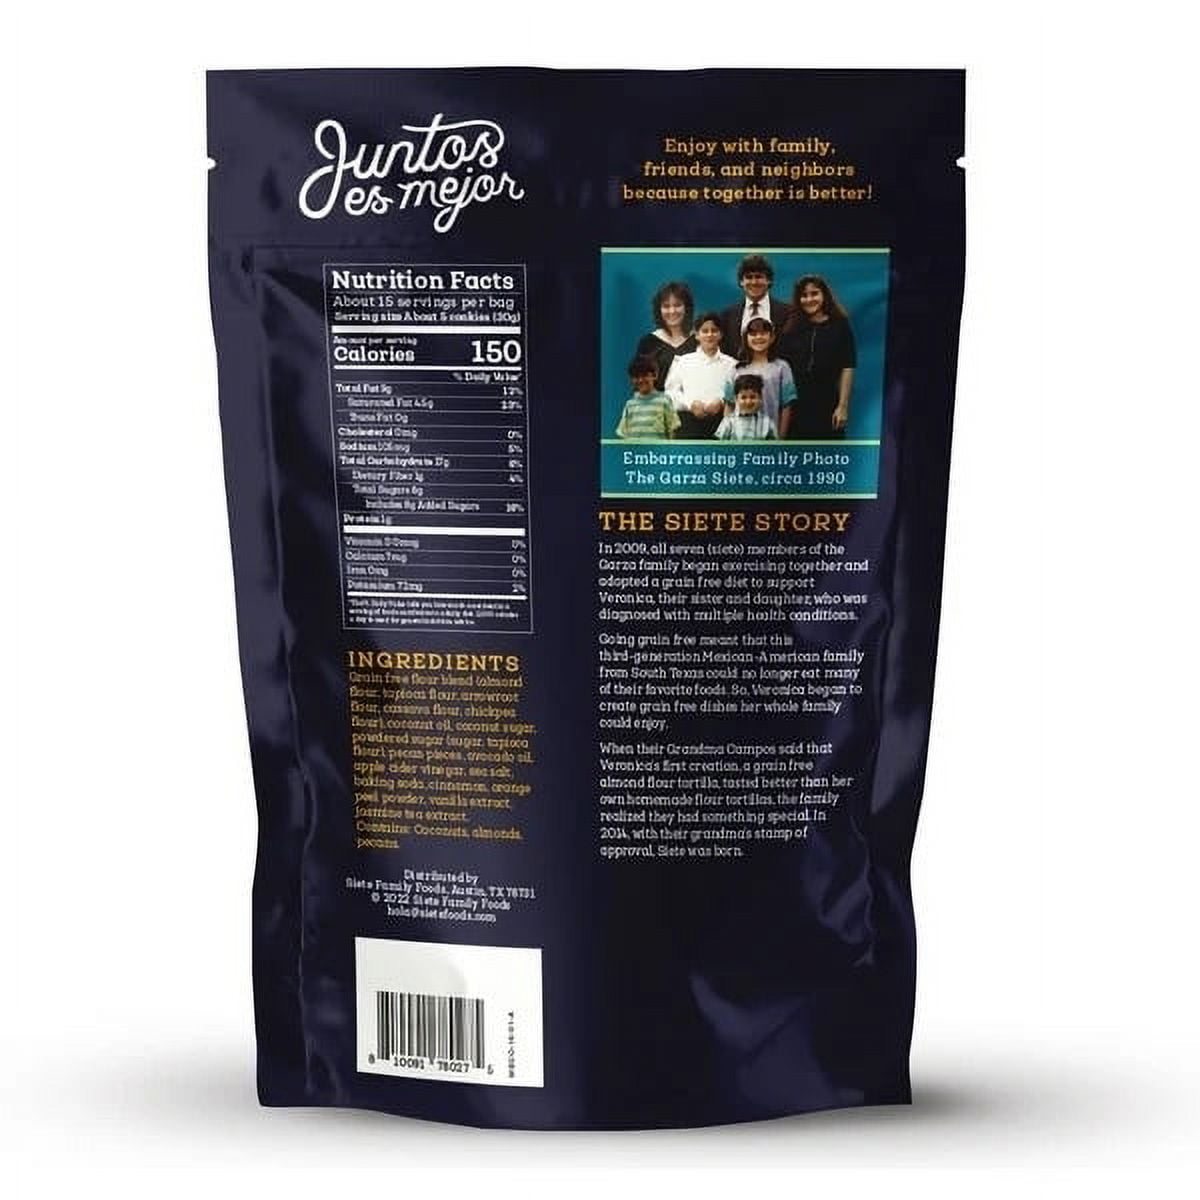 Siete Family Foods - 💍 You may now…find our 16oz bags of Grain Free  Mexican Wedding Cookies at Costco! Find your snackily ever after by  checking the list of states below to